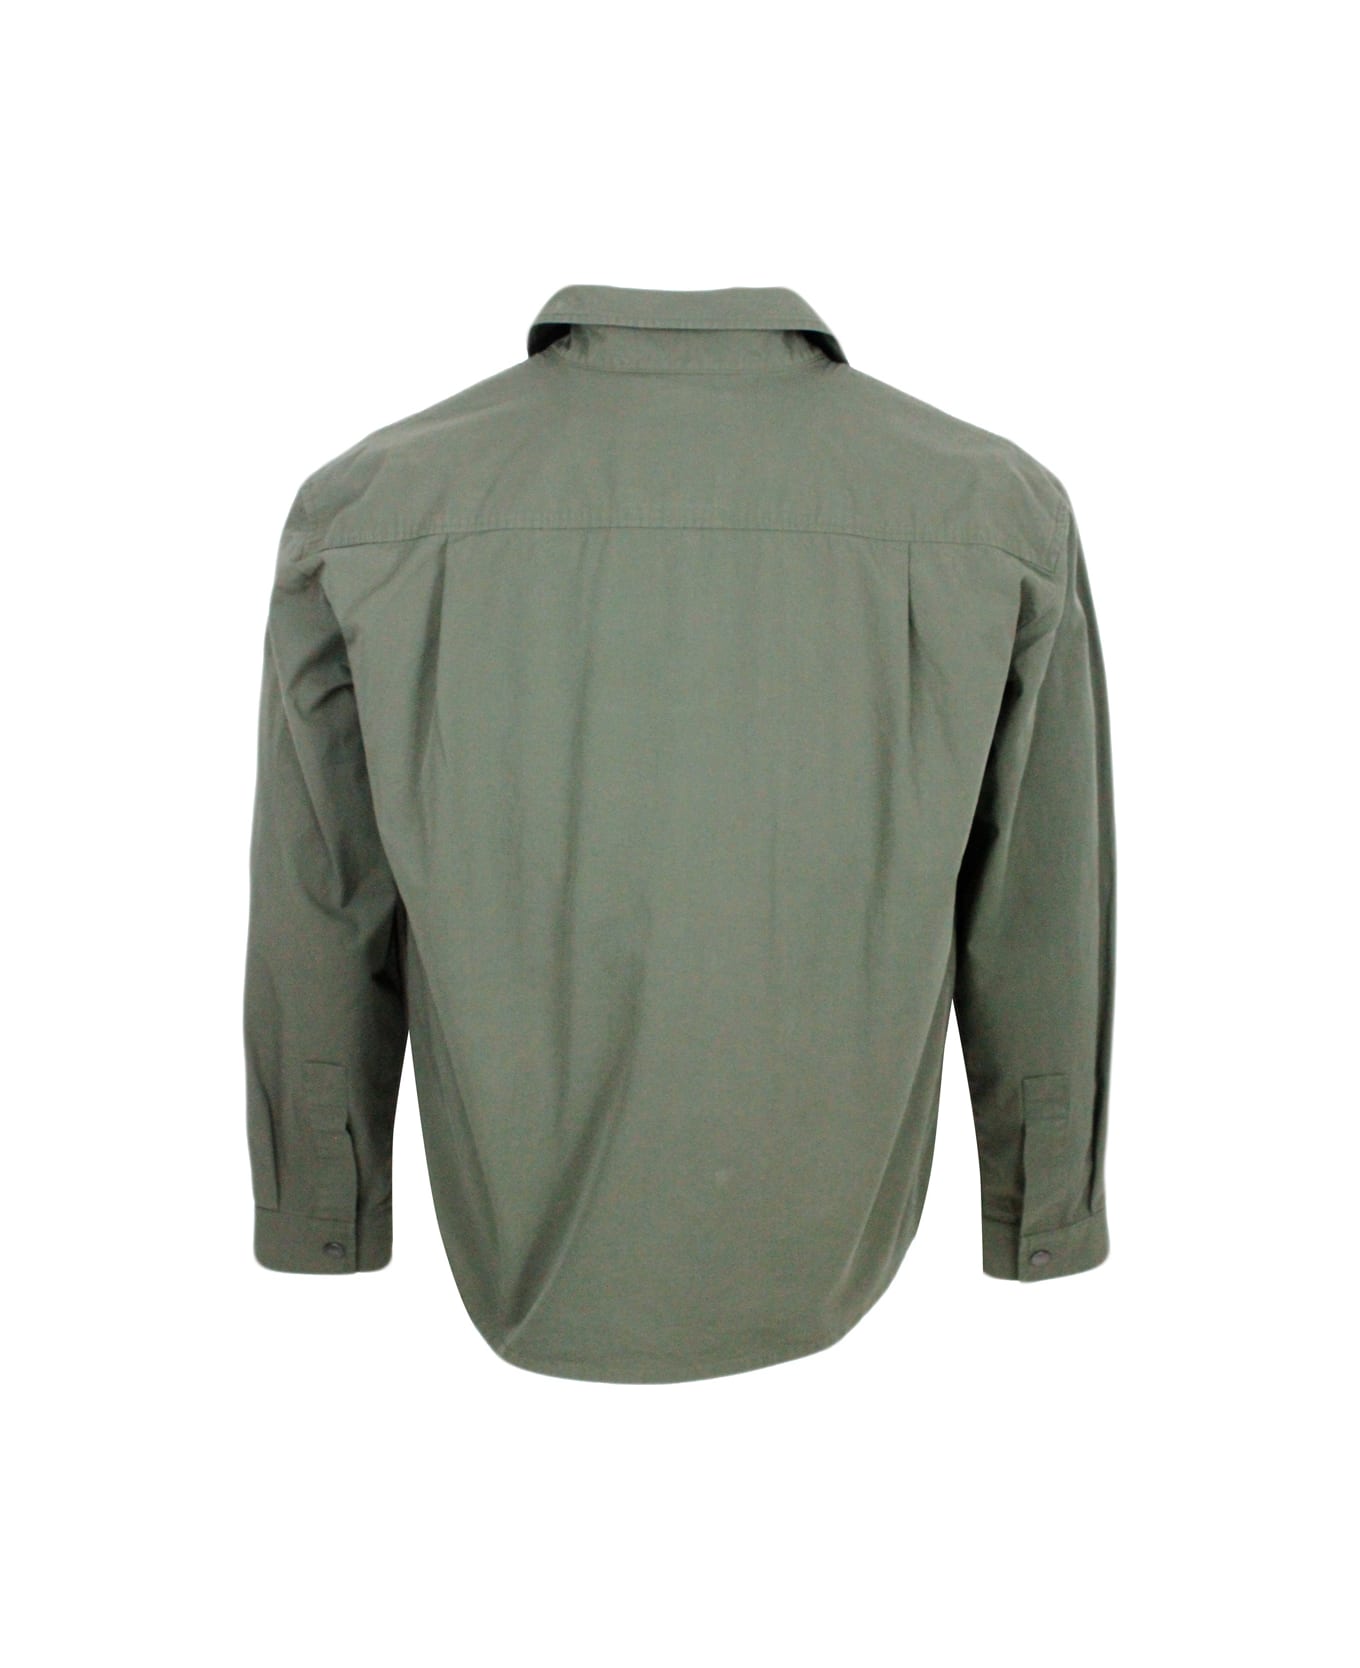 Add Recycled Nylon Shirt Jacket With Detachable Internal Padded Vest. - Military